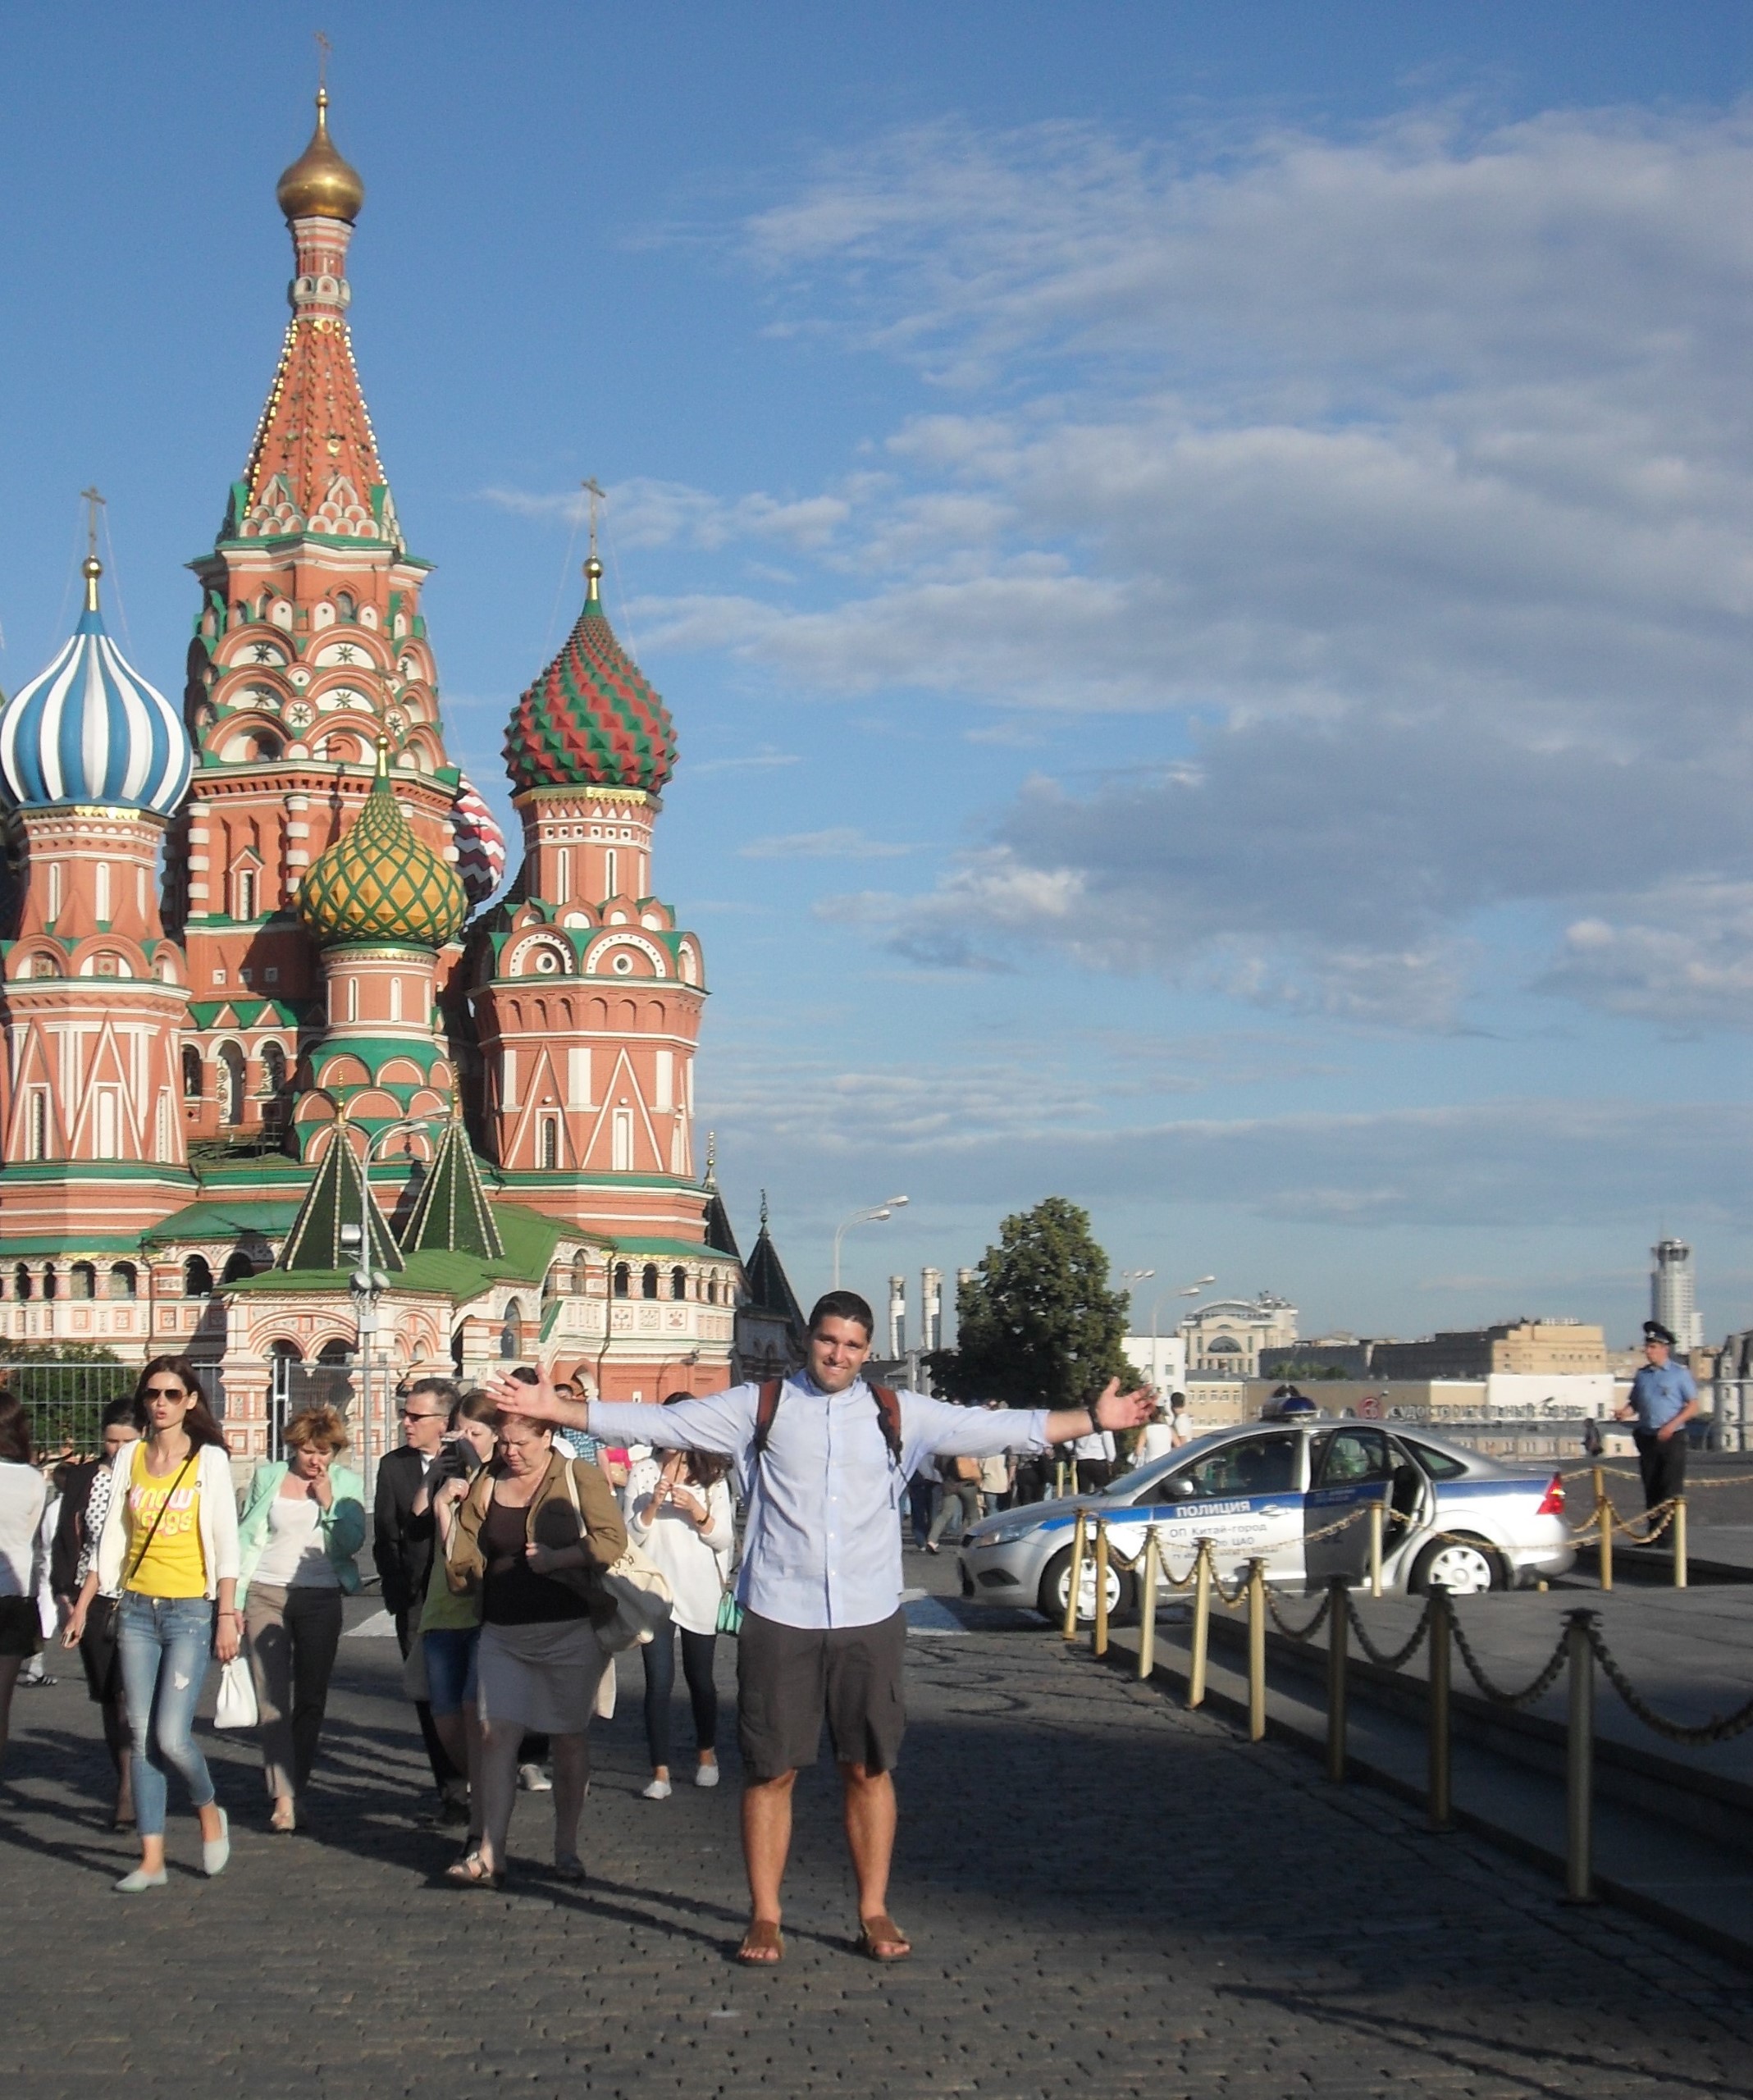 Erik traveled to Red Square in Moscow, Russia, while attending the fourth Fire Behavior and Fuels Conference in St. Petersburg.